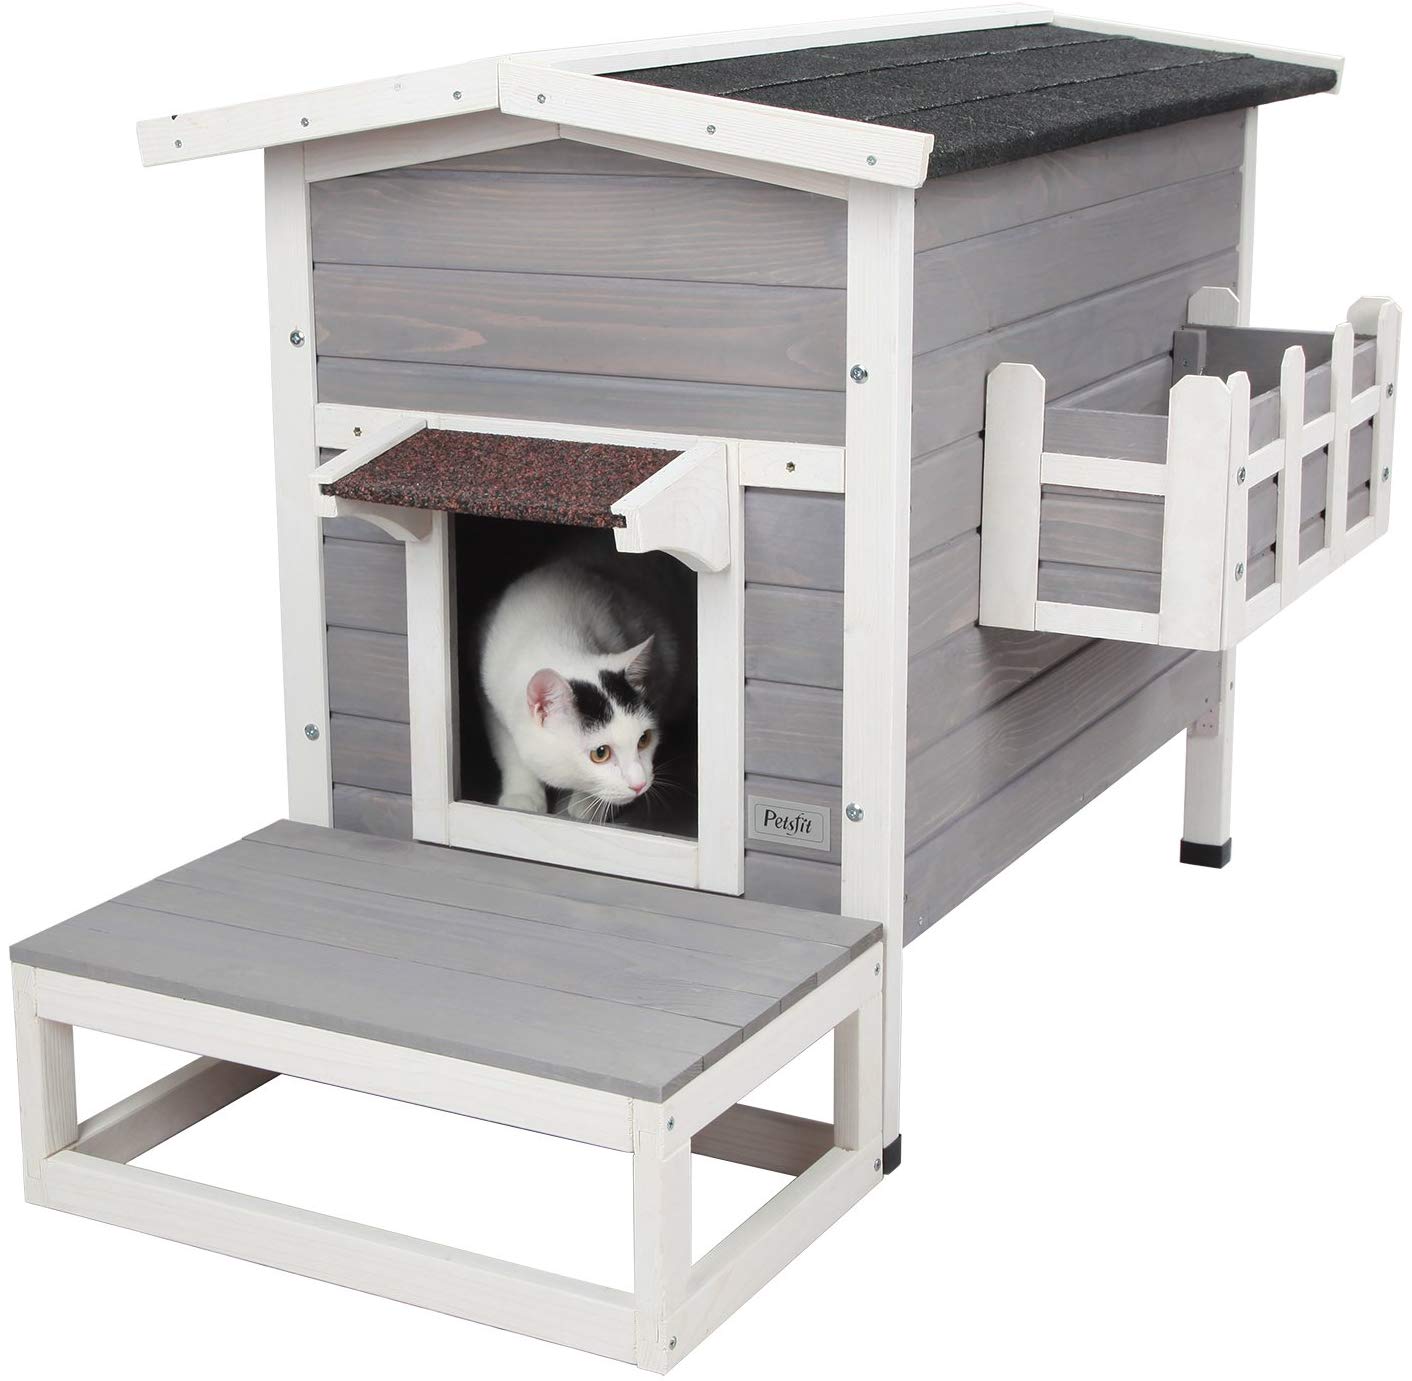 Buy the Best Outdoor Cat House to Keep Feral Cats Safe